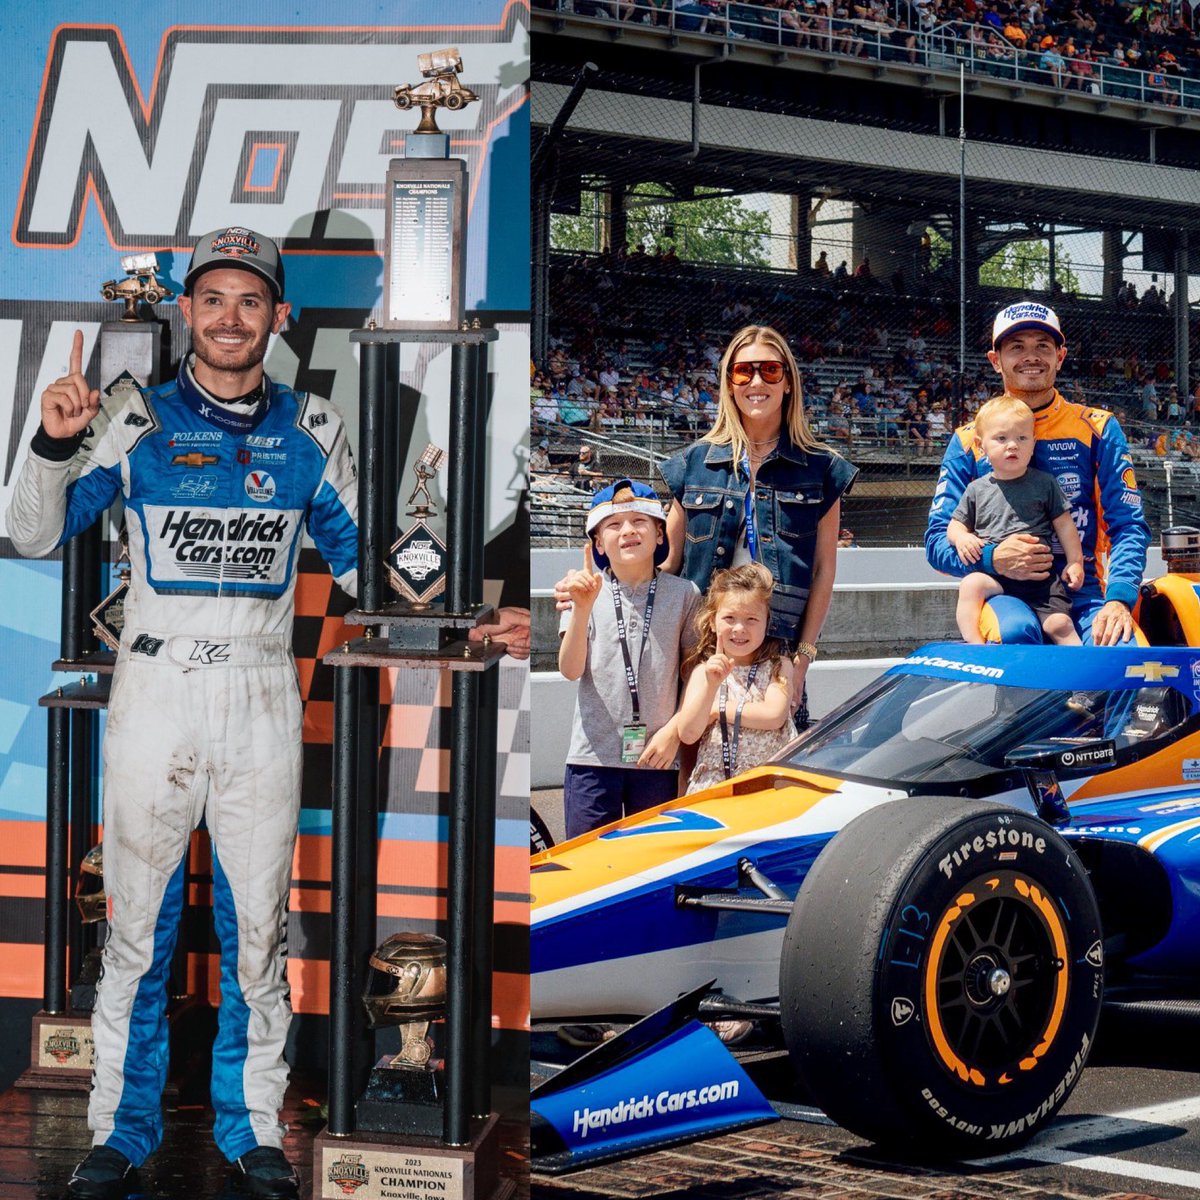 It’s not everyday that the defending Knoxville Nationals Champion competes at the Indy 500! Good luck today Kyle!